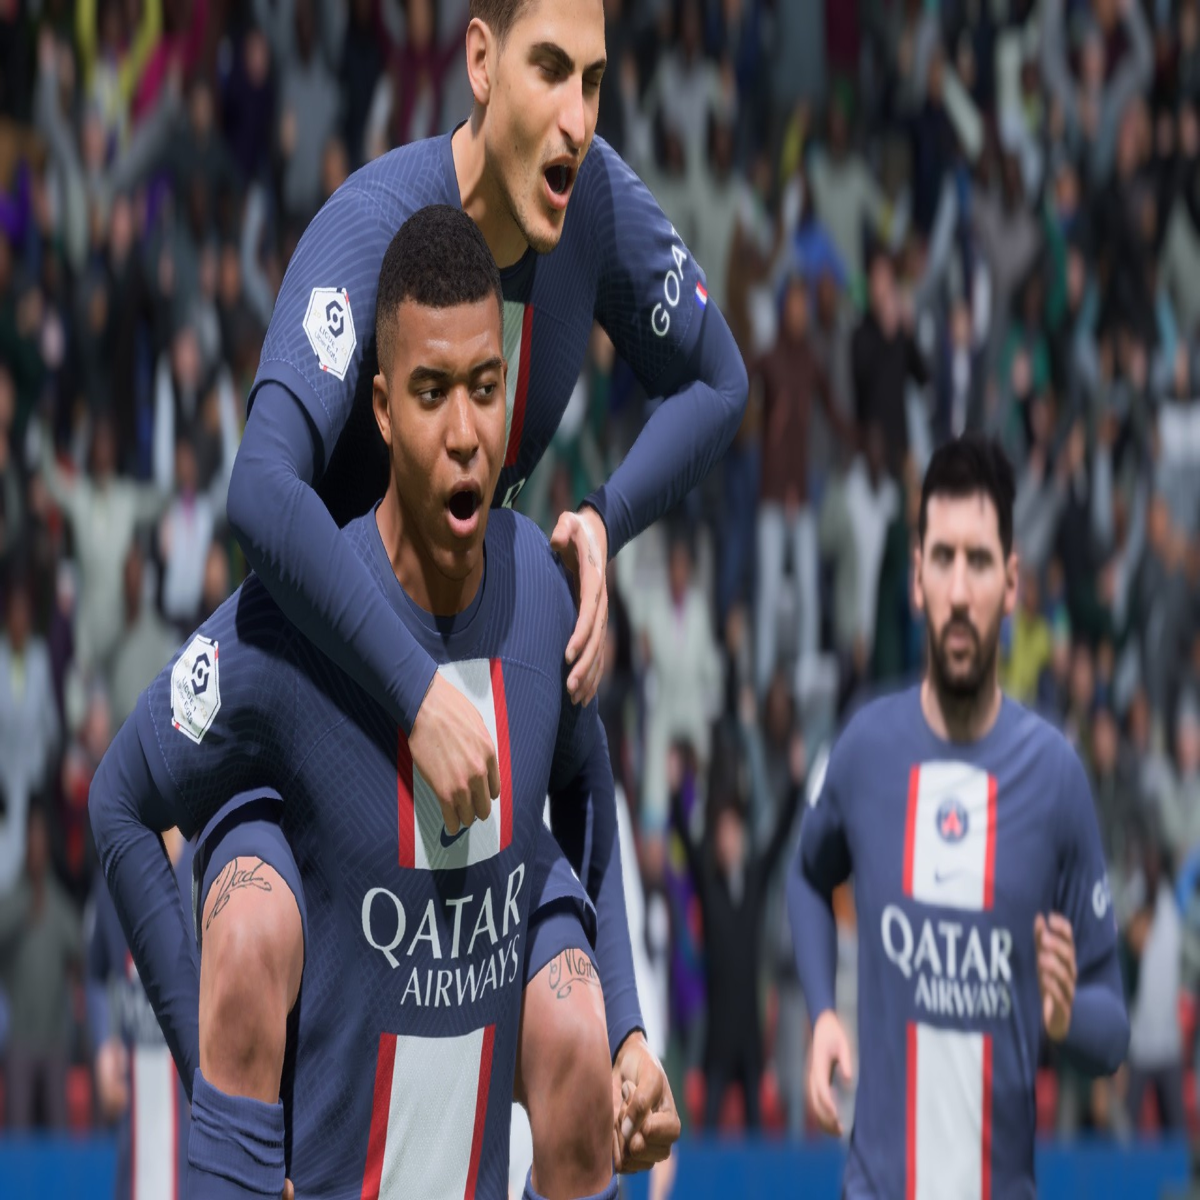 FIFA 23 and PES getting old? A 90s football classic is coming to Steam